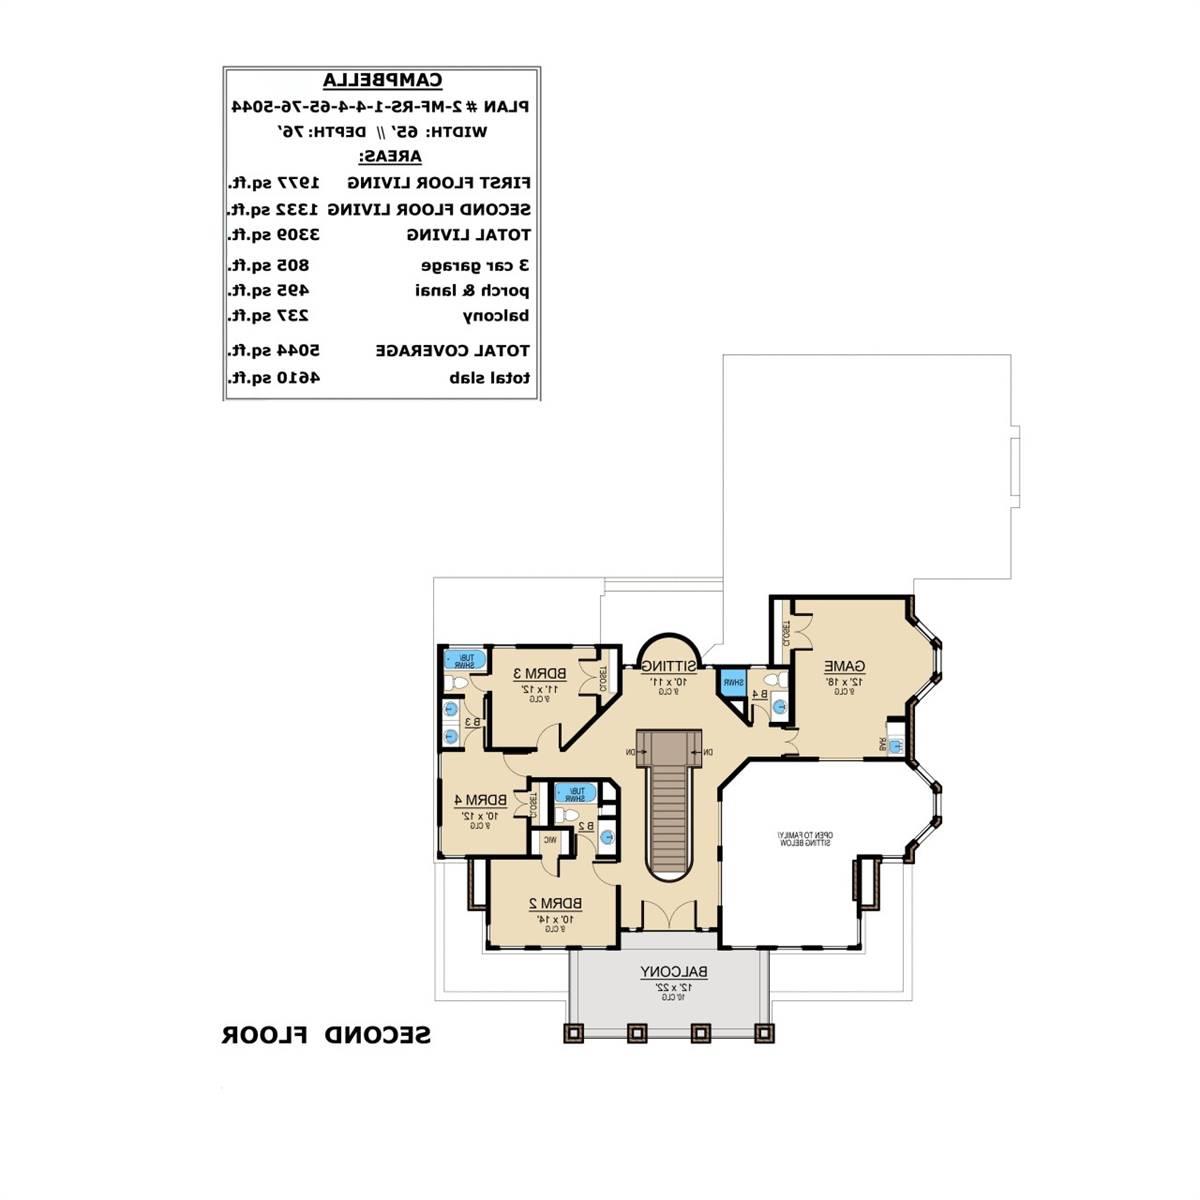 2nd Floor image of Campbella House Plan